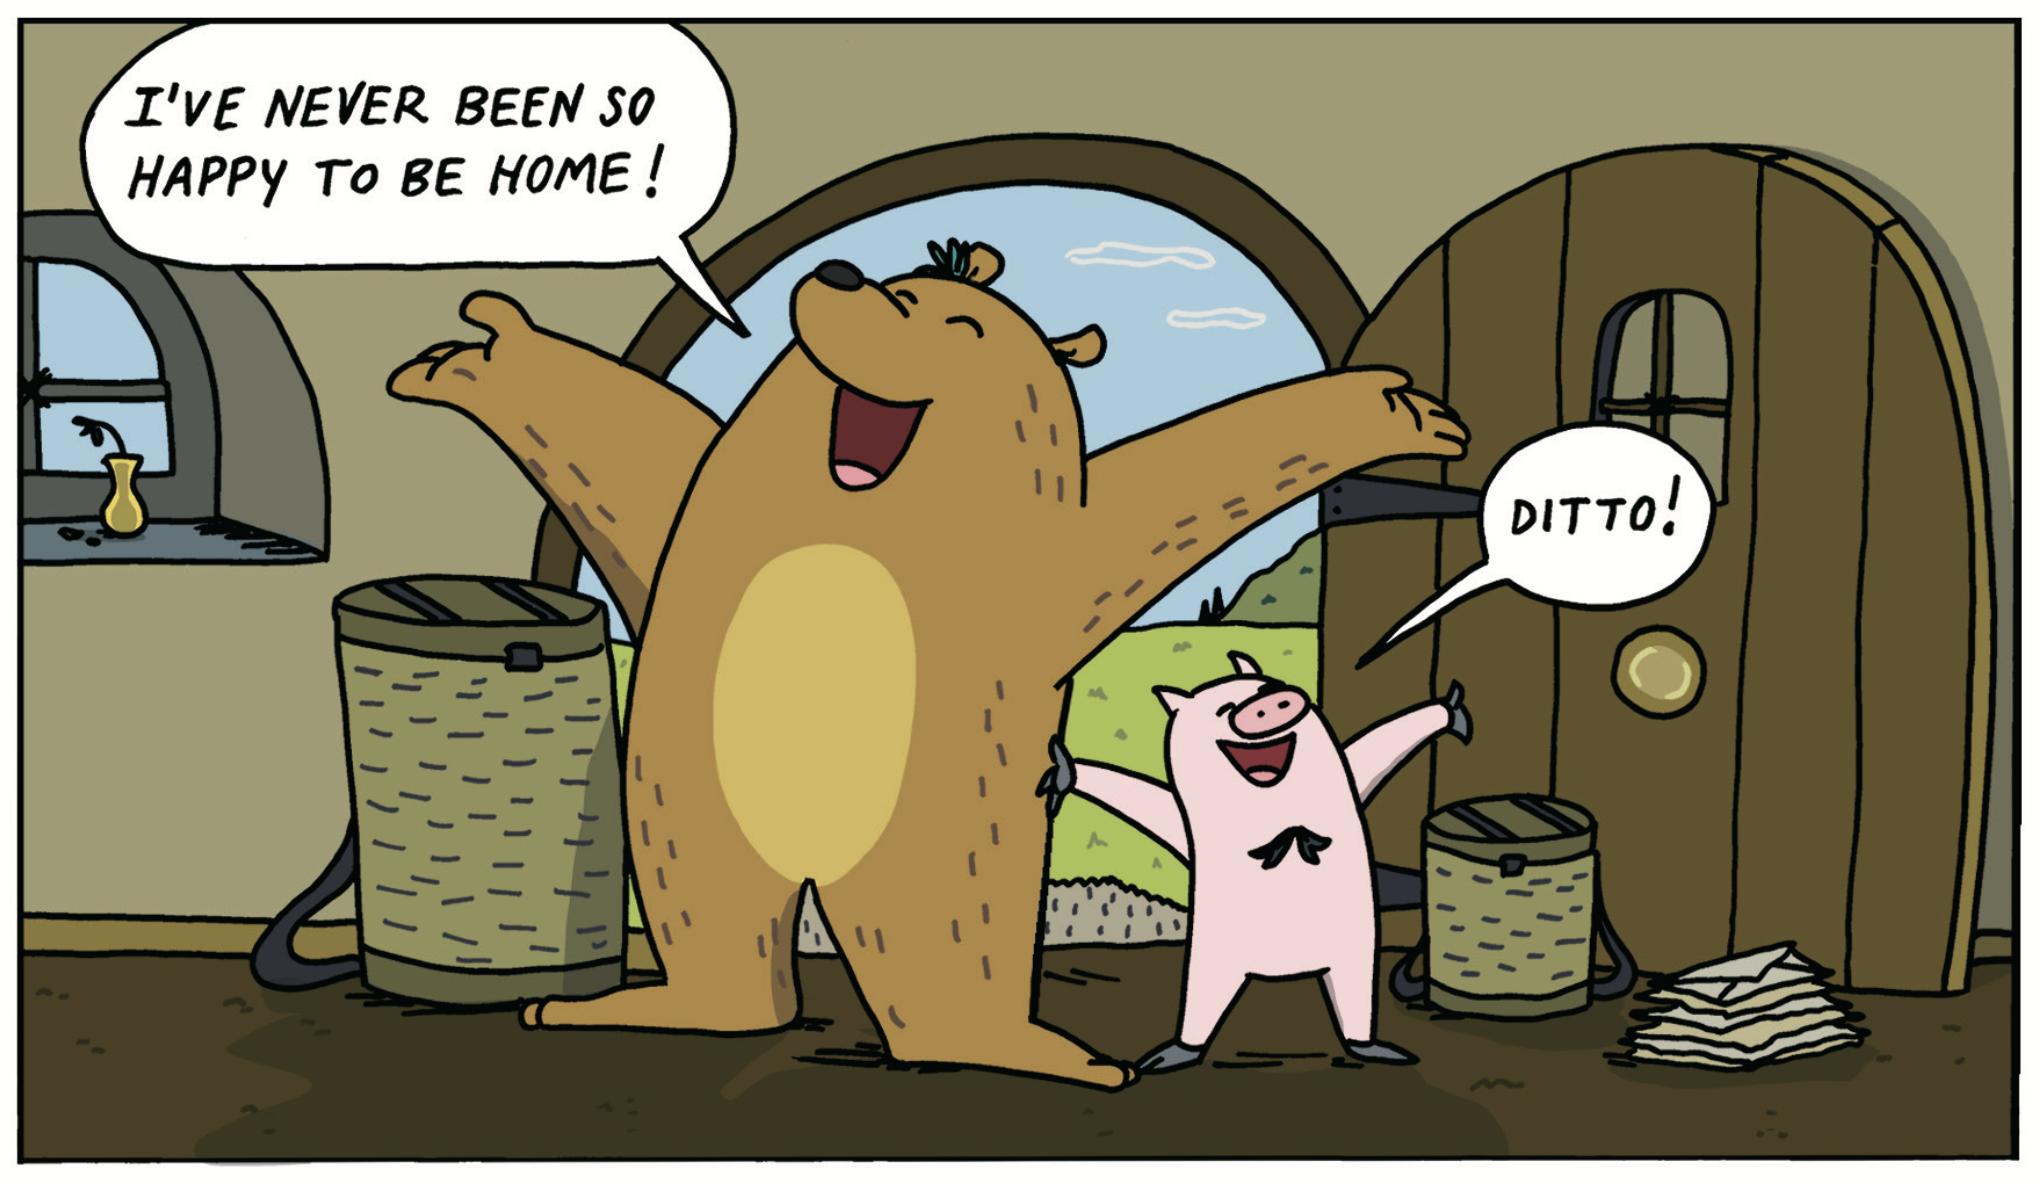 Inside the building, the bear says, "I've never been so happy to be home!" The pig says, "Ditto!"